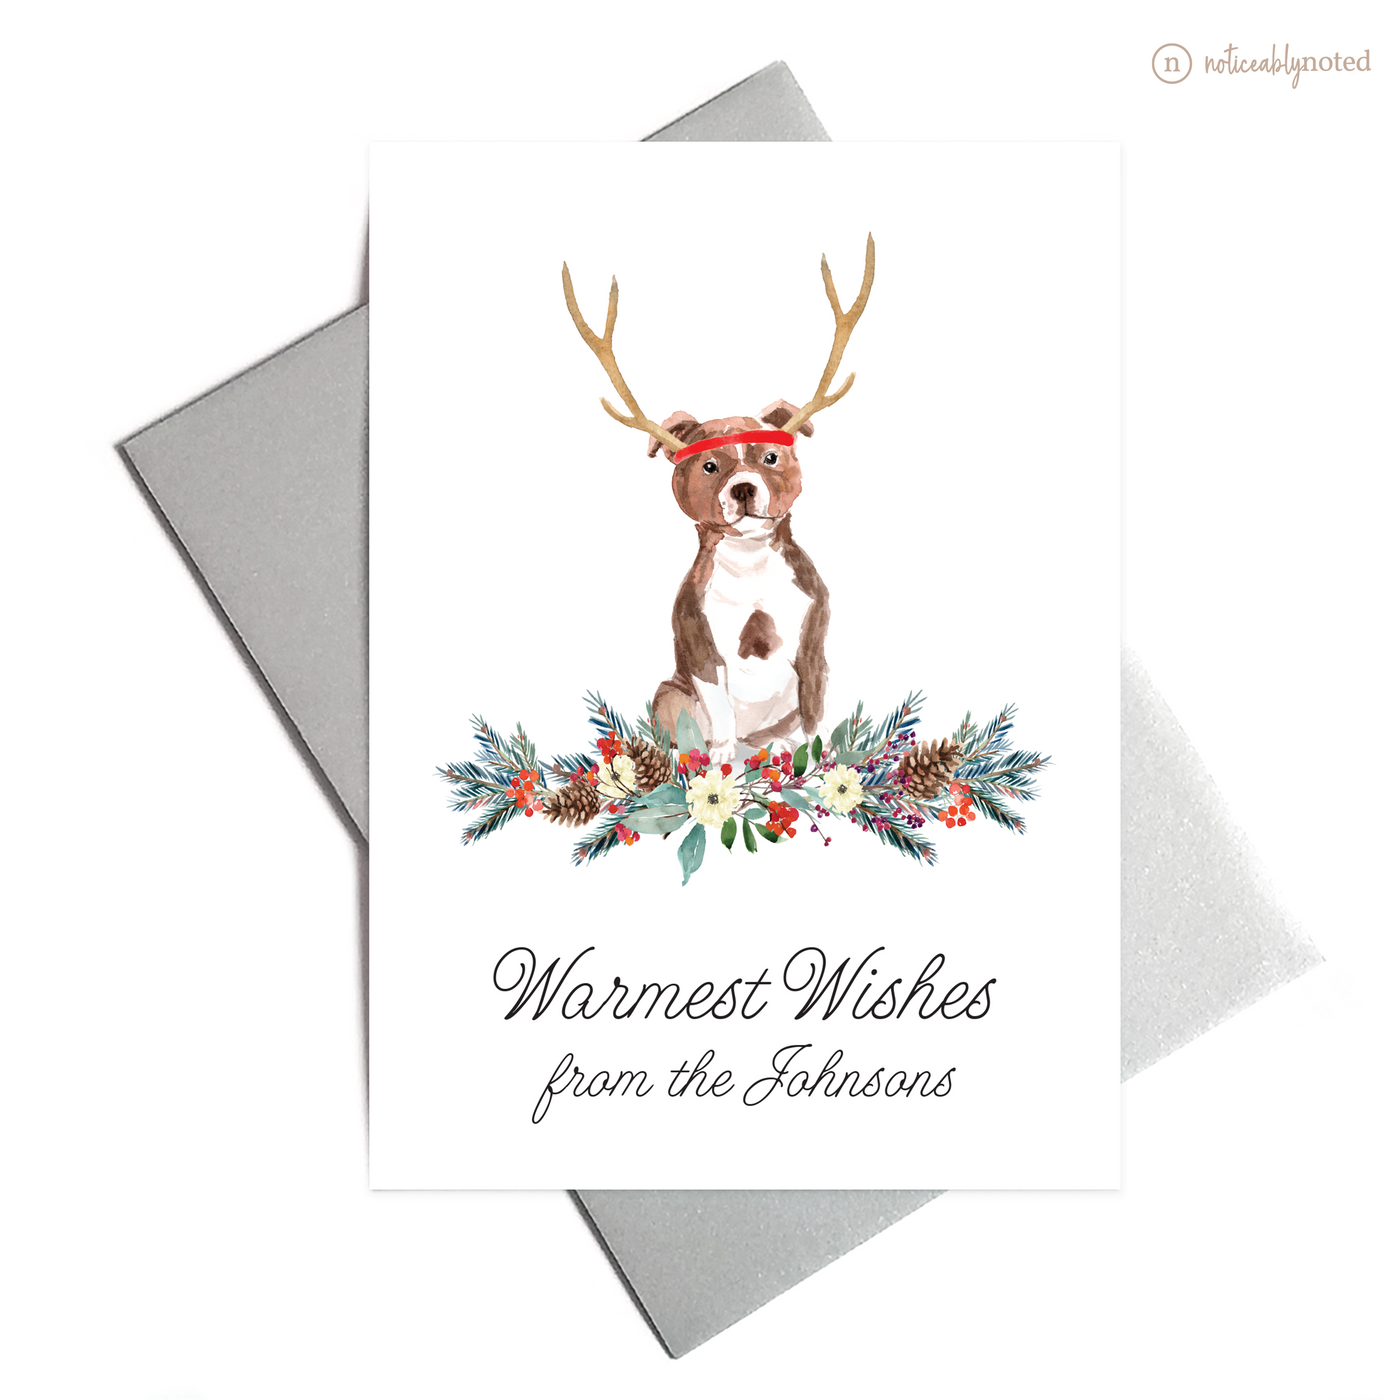 Staffordshire Bull Terrier Holiday Greeting Cards | Noticeably Noted